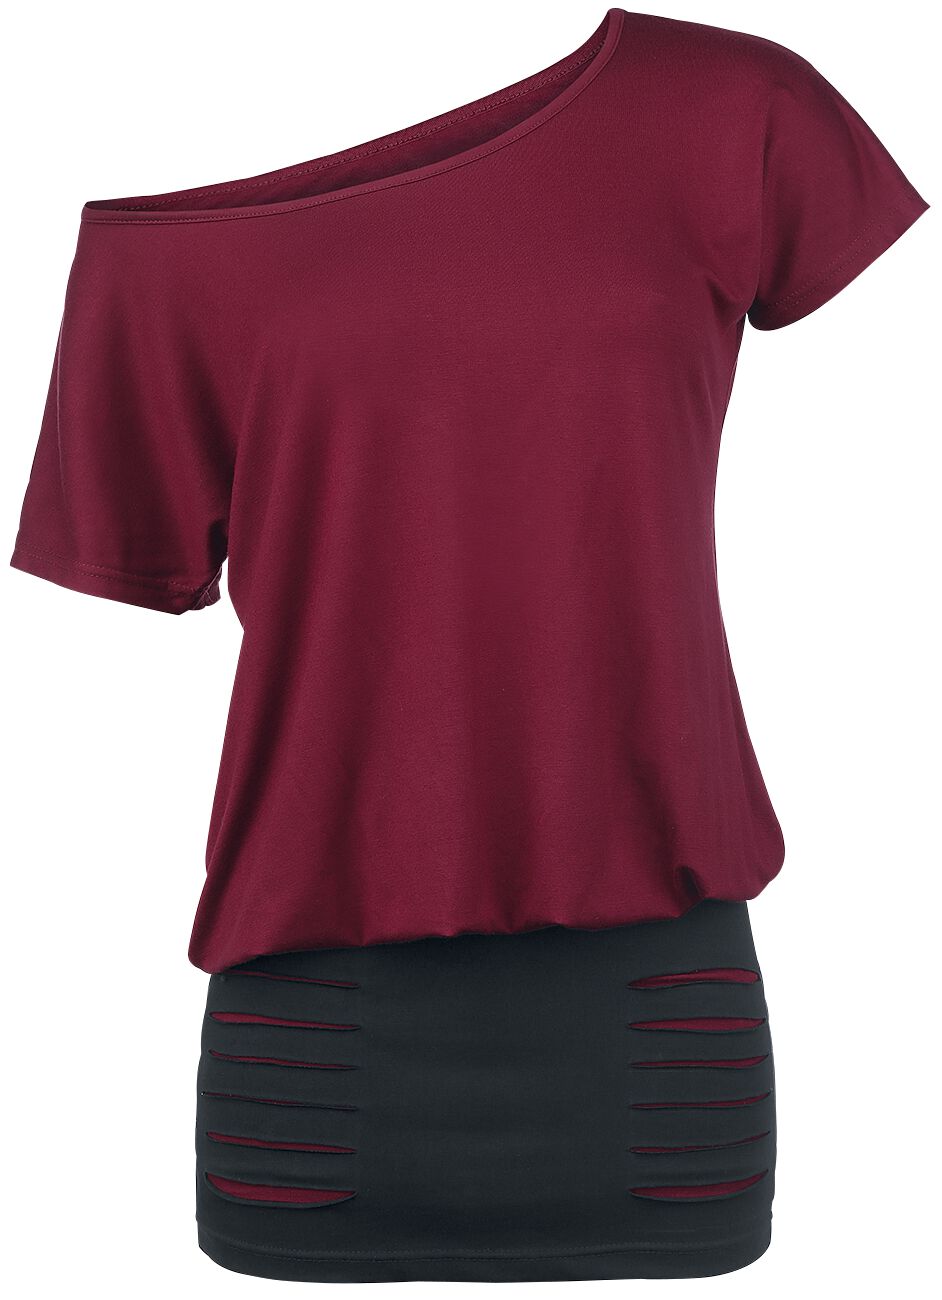 RED by EMP Hold Loosely Kurzes Kleid bordeaux schwarz in XS